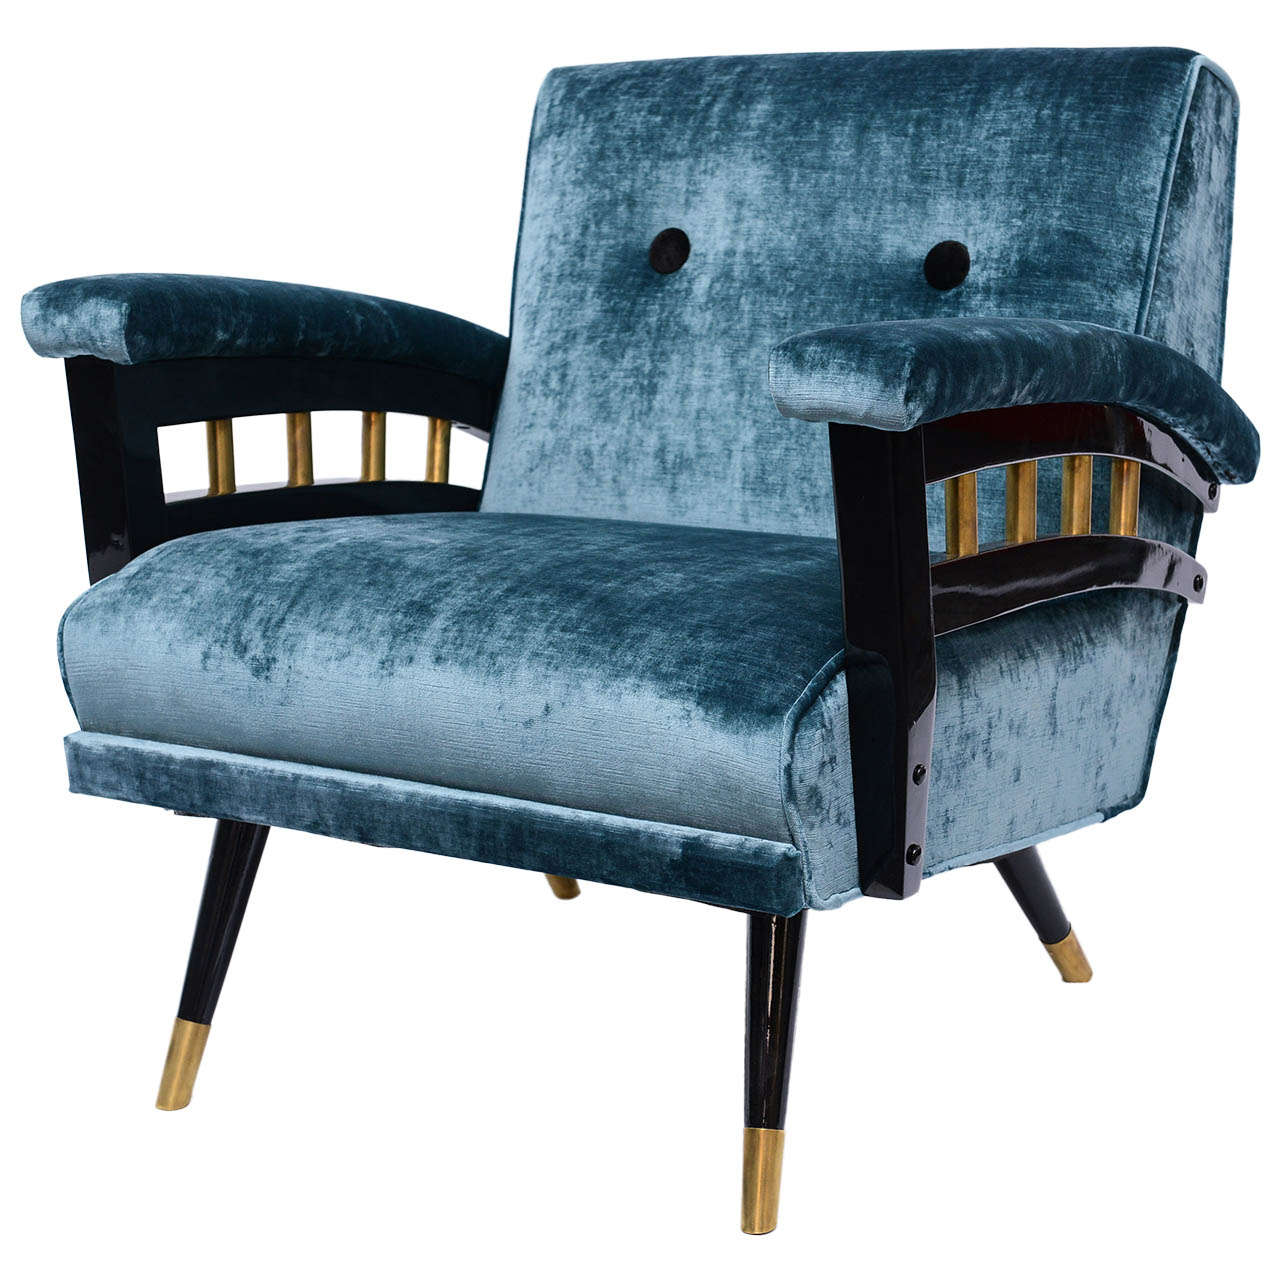 Stunning Mid-Century Blue Velvet and Black Lacquer Rocking Chair